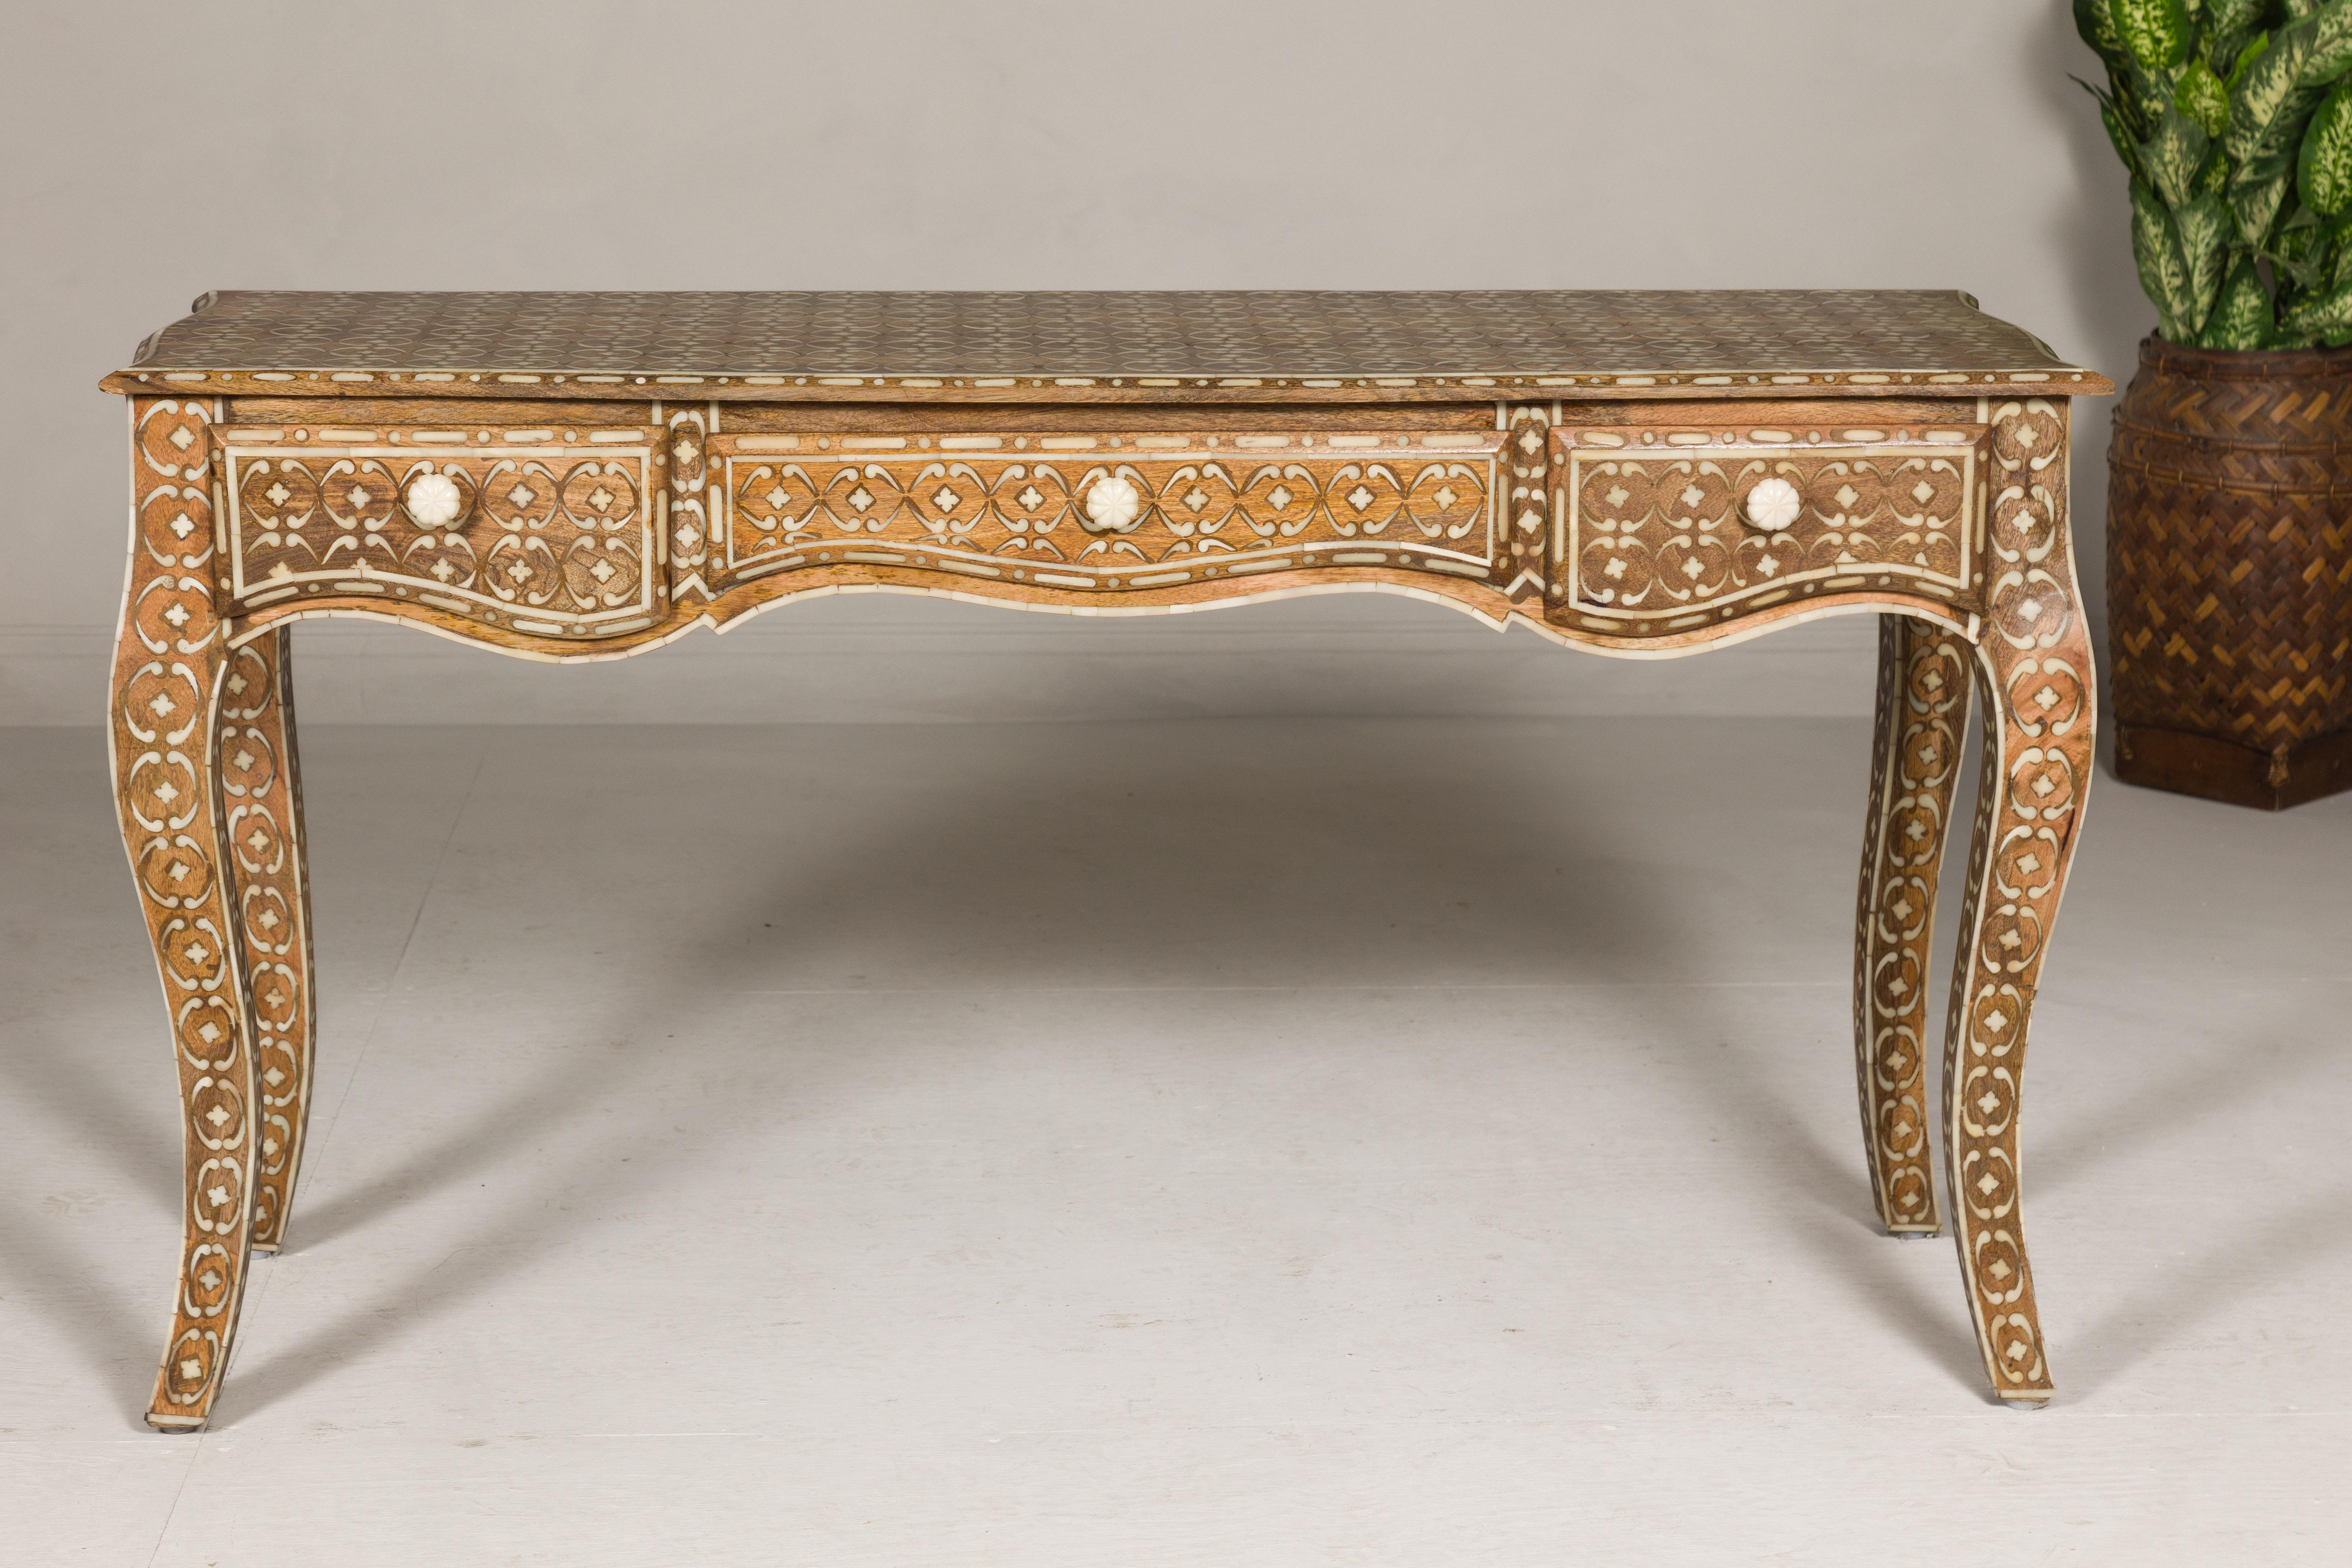 Anglo-Indian Louis XV style mango wood console table or desk with inlaid bone décor. Exuding the grandeur of Anglo-Indian style craftsmanship, this Louis XV inspired console table is a masterpiece carved from robust mango wood. Its exquisite inlay